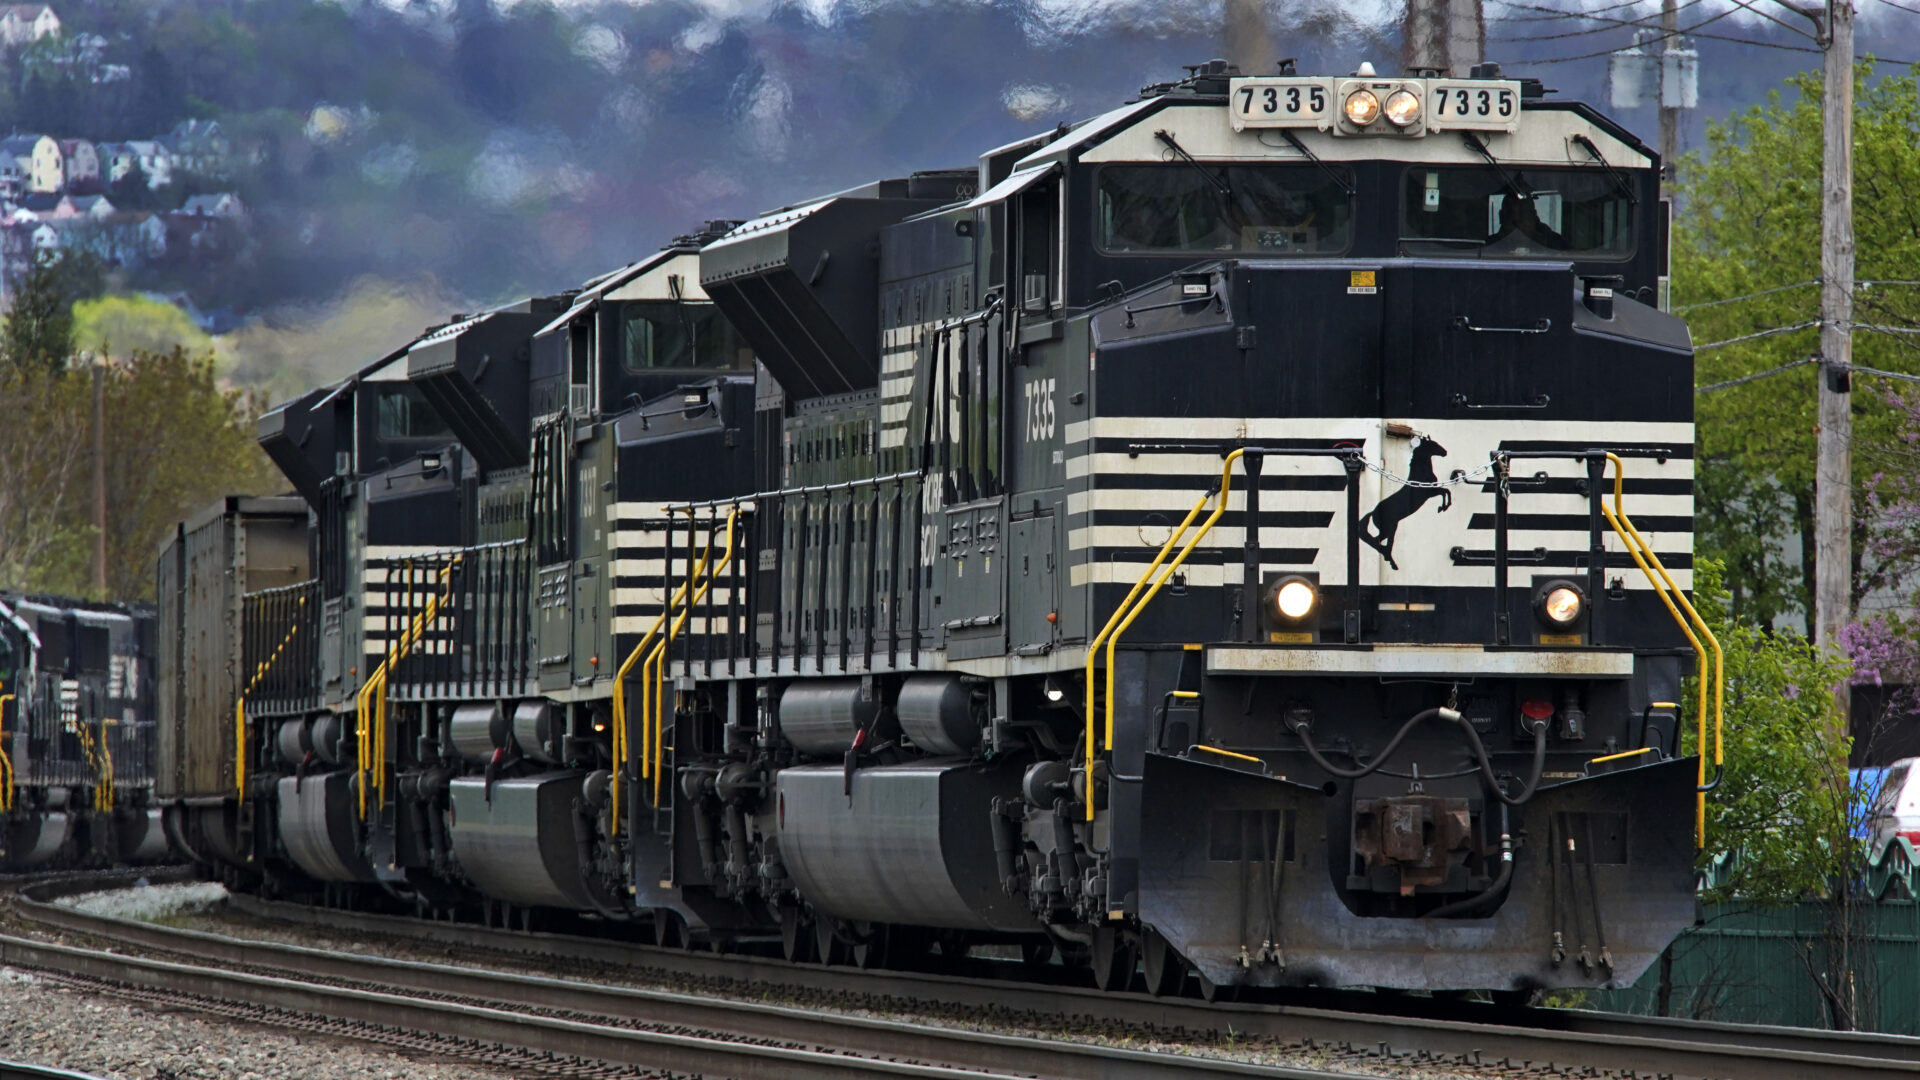 FILE - A Norfolk Southern freight train makes it way through Homestead, Pa. on April 27, 2022. Norfolk Southern reports earnings on Wednesday, April 26, 2023. (AP Photo/Gene J. Puskar, File)